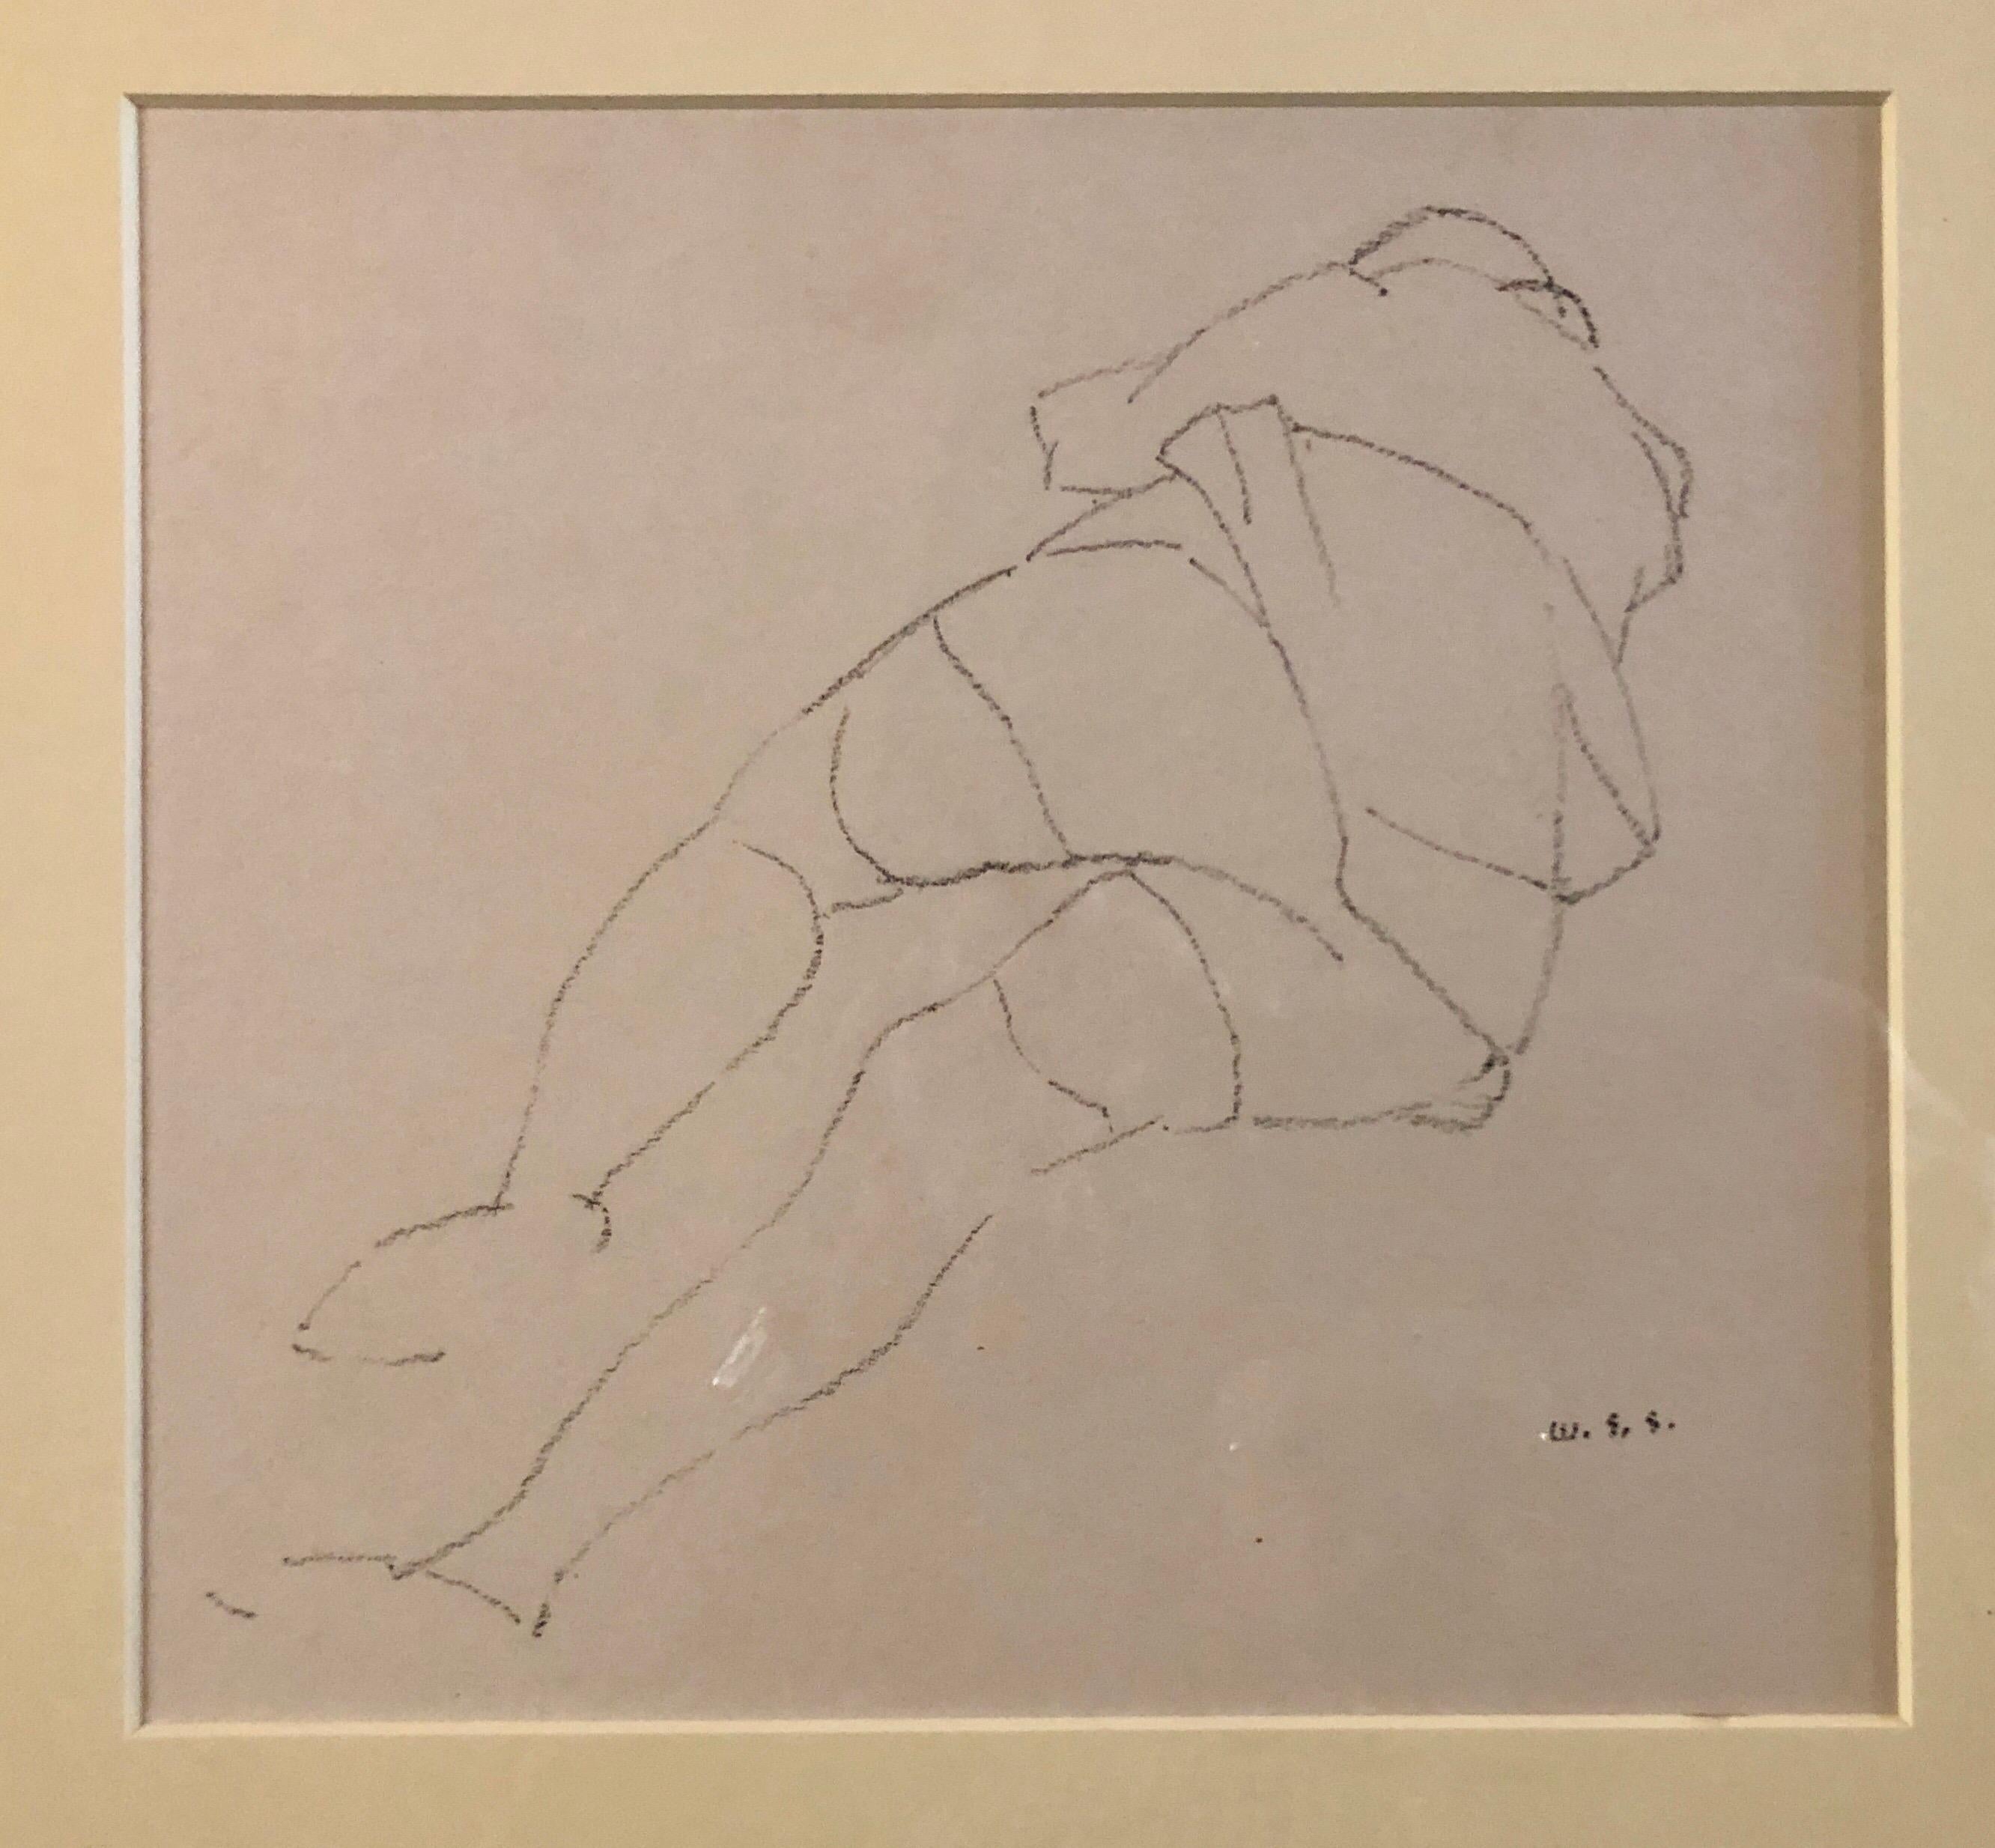 Reclining Nude.Early modernist line drawing, by American artist William S. Schwartz, c. 1940, gouache painting, signed with initials, framed. (size includes frame). Work is reminiscent of the drawings of Joseph Solman.  

William S. Schwartz